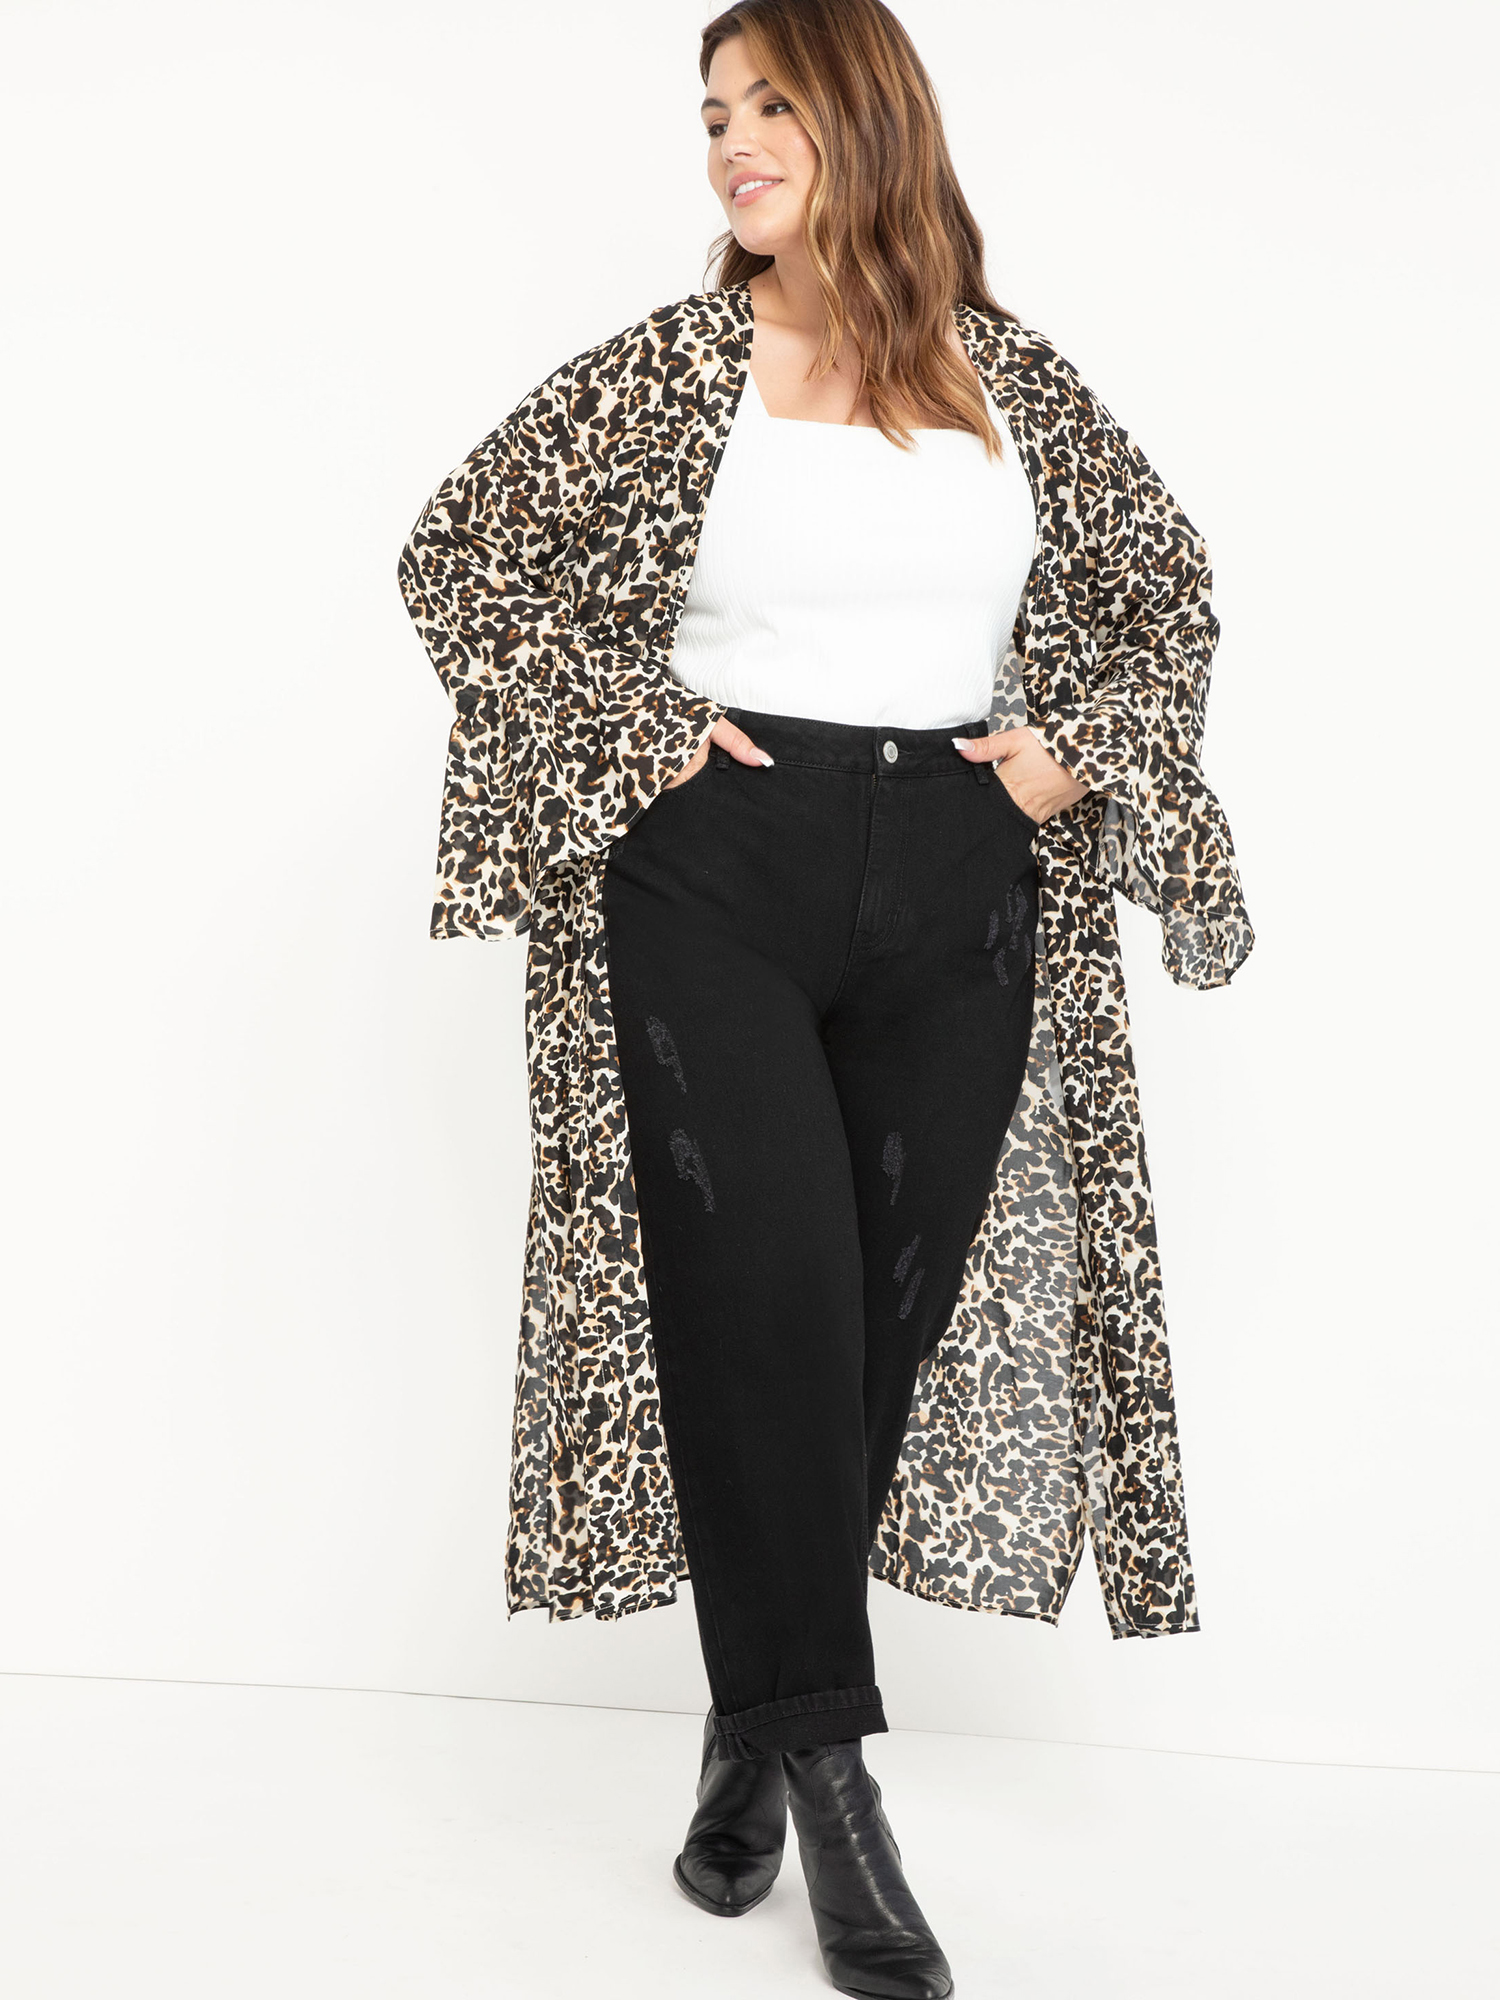 ELOQUII Elements Plus Size Leopard Print Duster with Statement Sleeves - image 3 of 4